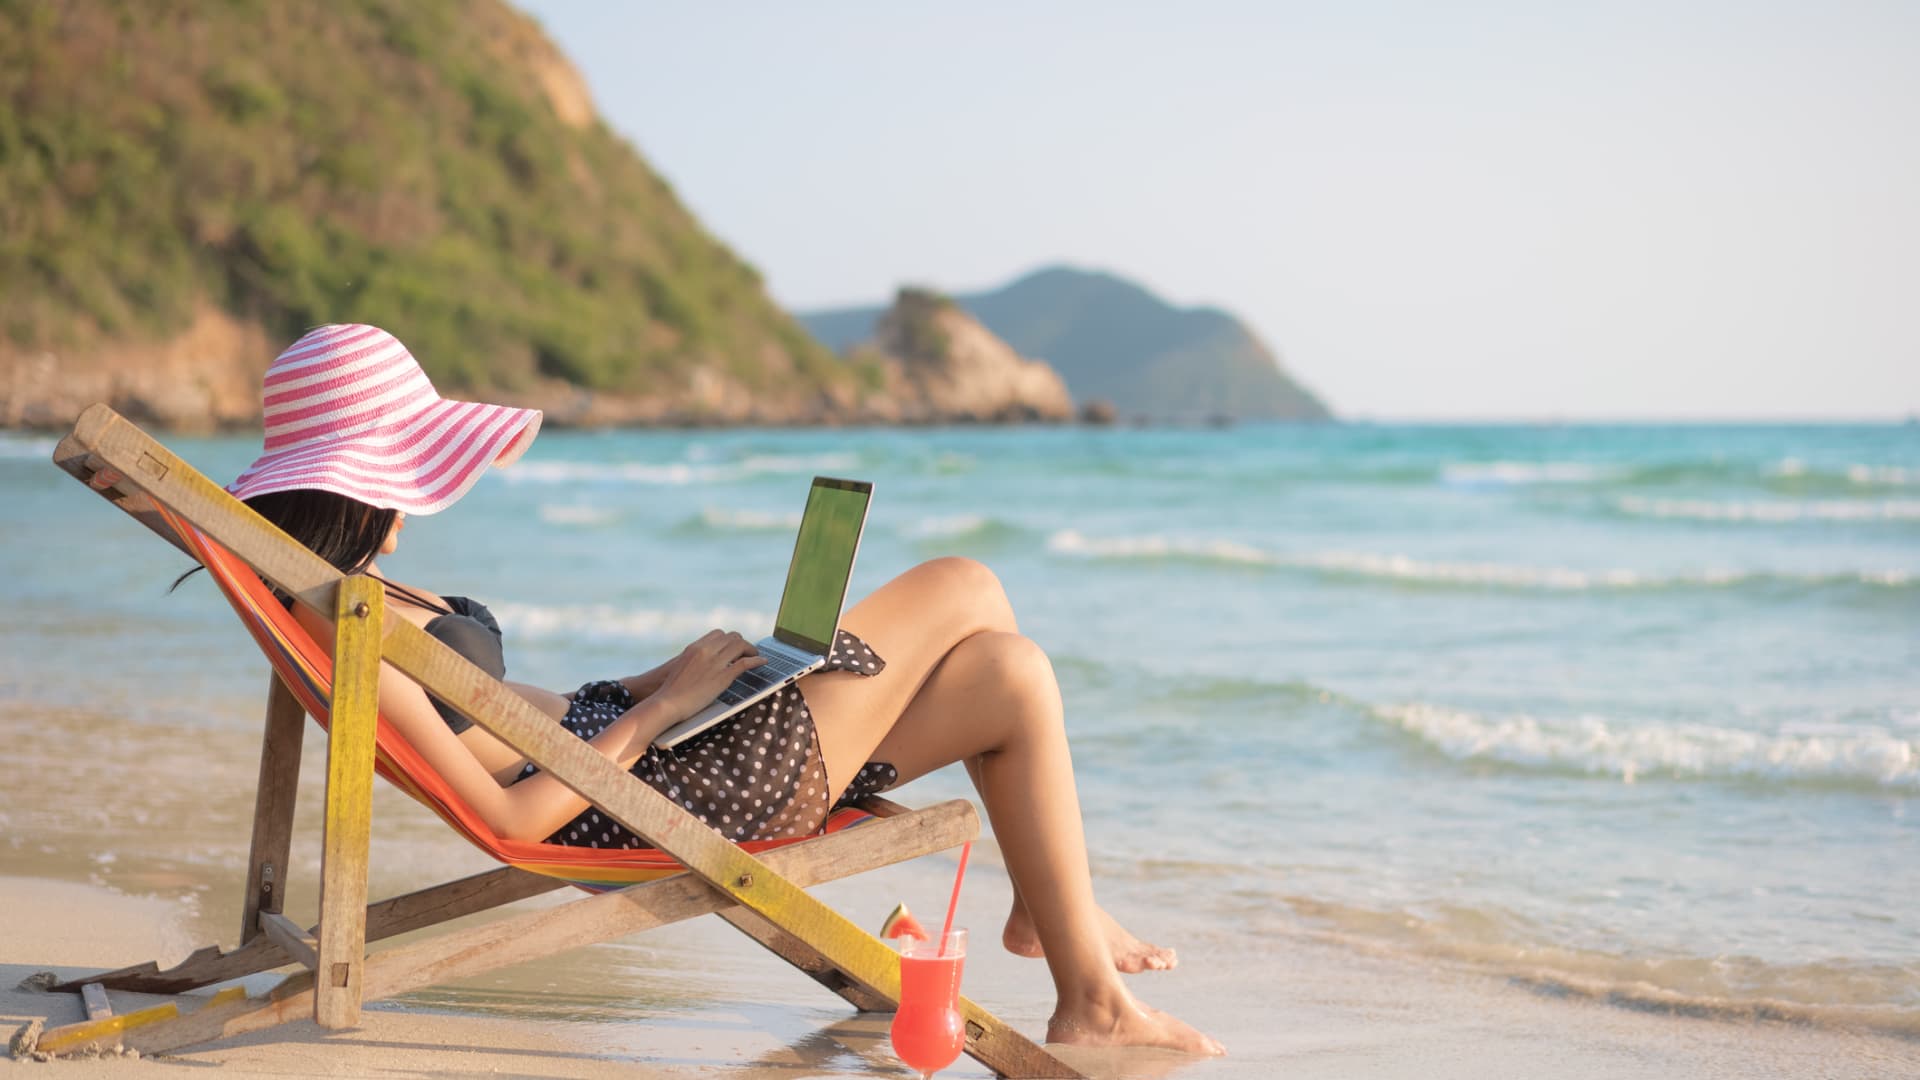 A zoom call by the beach? Here are the 10 best 'workcation' cities for remote workers